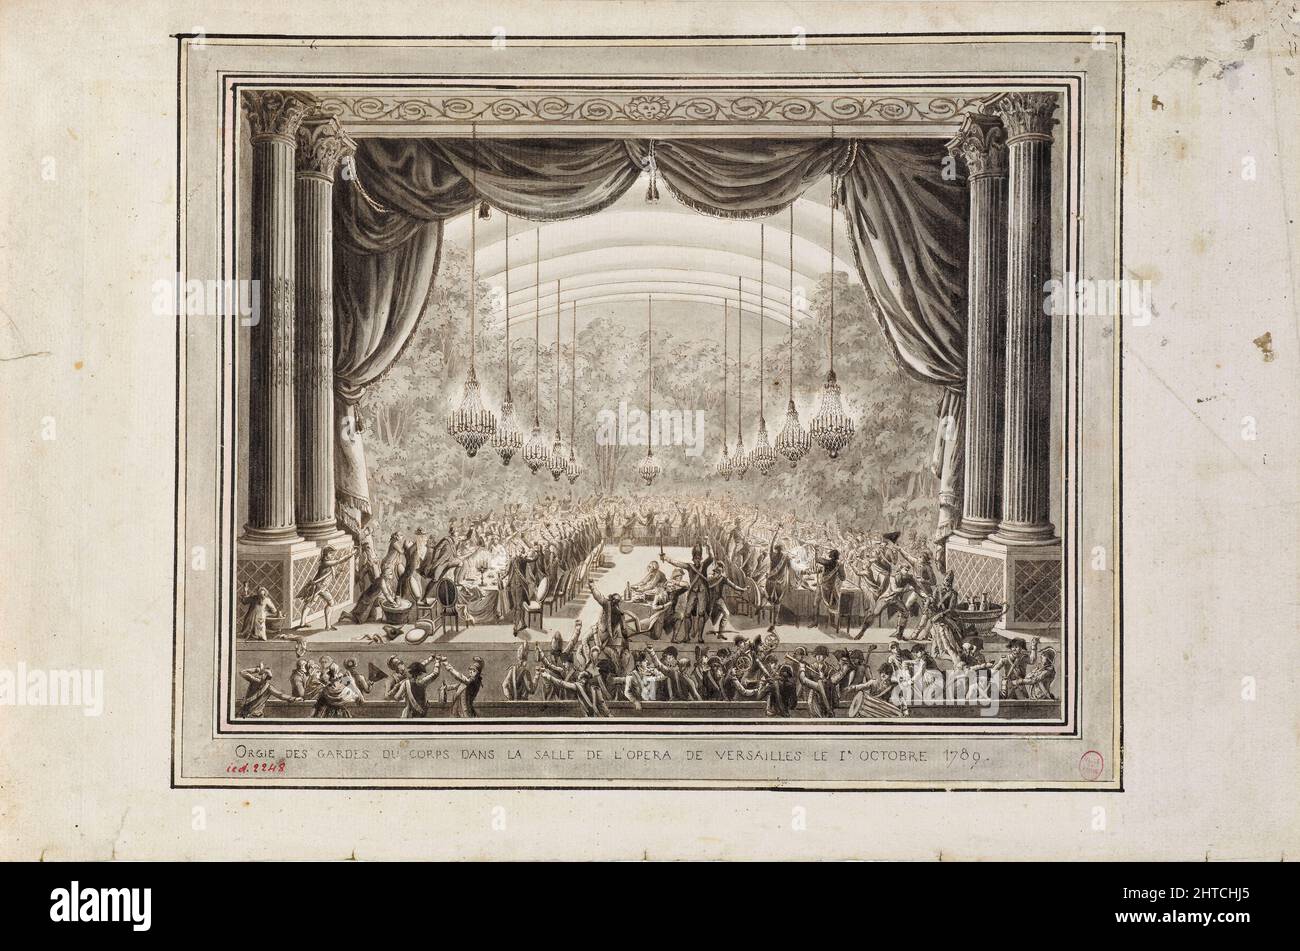 Banquet of the Garde du Corps in the Op&#xe9;ra Royal de Versailles, October 1, 1789, 1789. Found in the Collection of the Mus&#xe9;e Carnavalet, Paris. Stock Photo